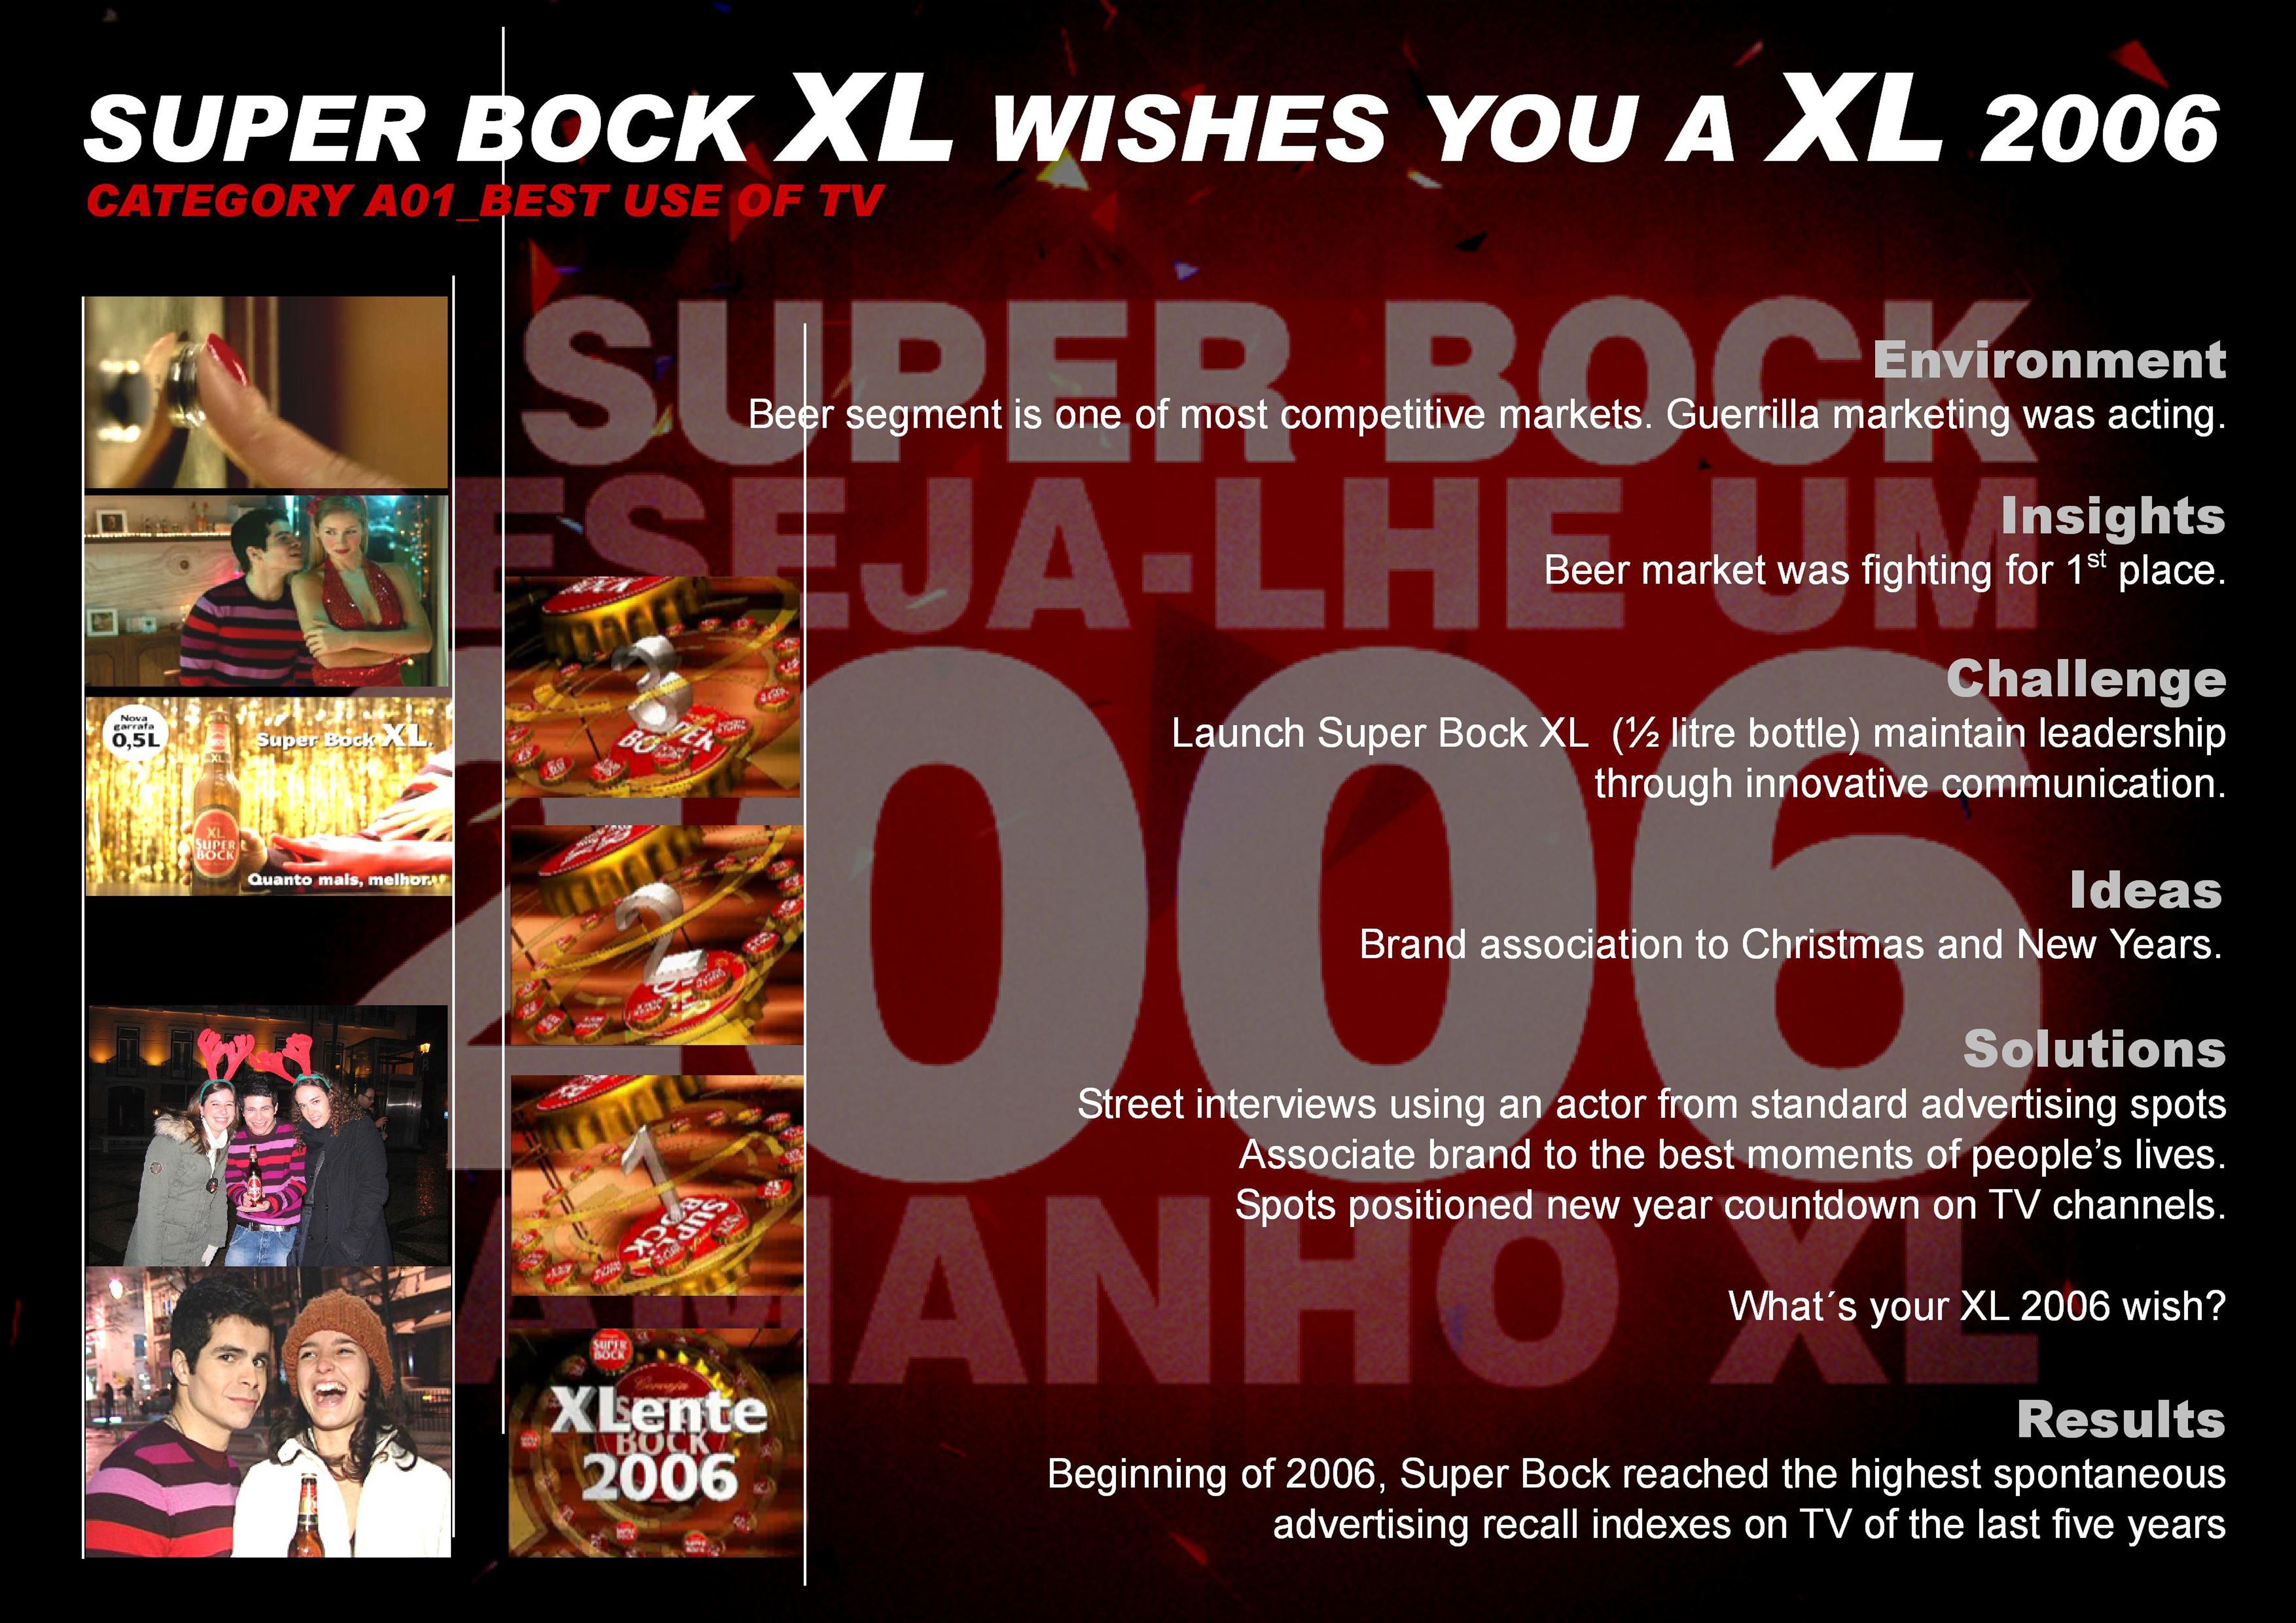 SUPER BOCK WISHES YOU AN XL 2006